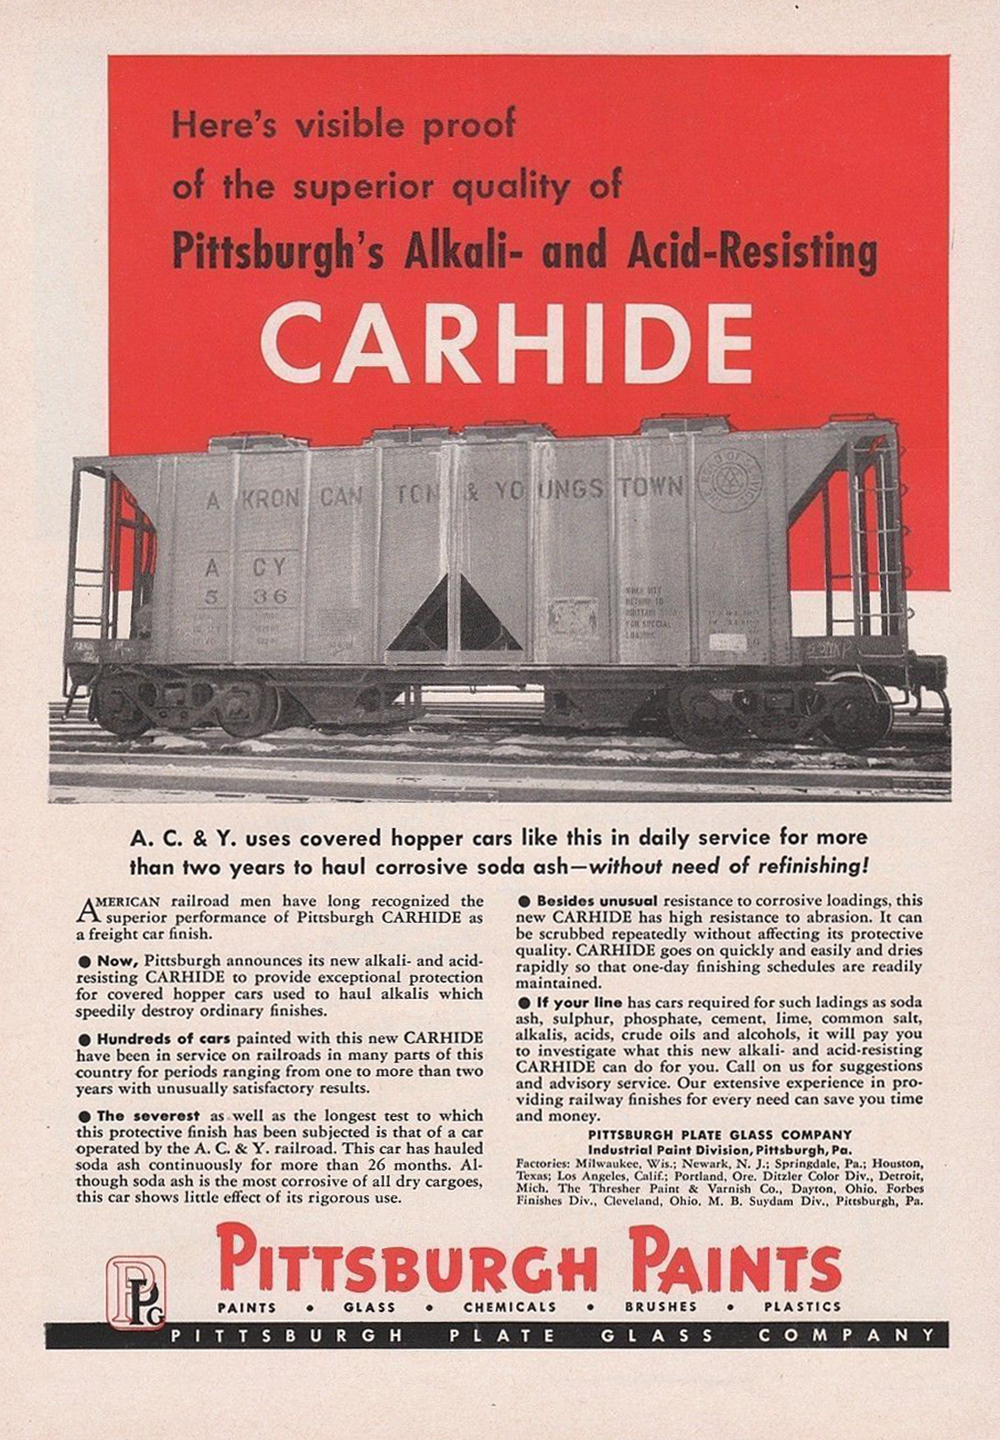 Carhide on the Akron Canton & Youngstown by PPG